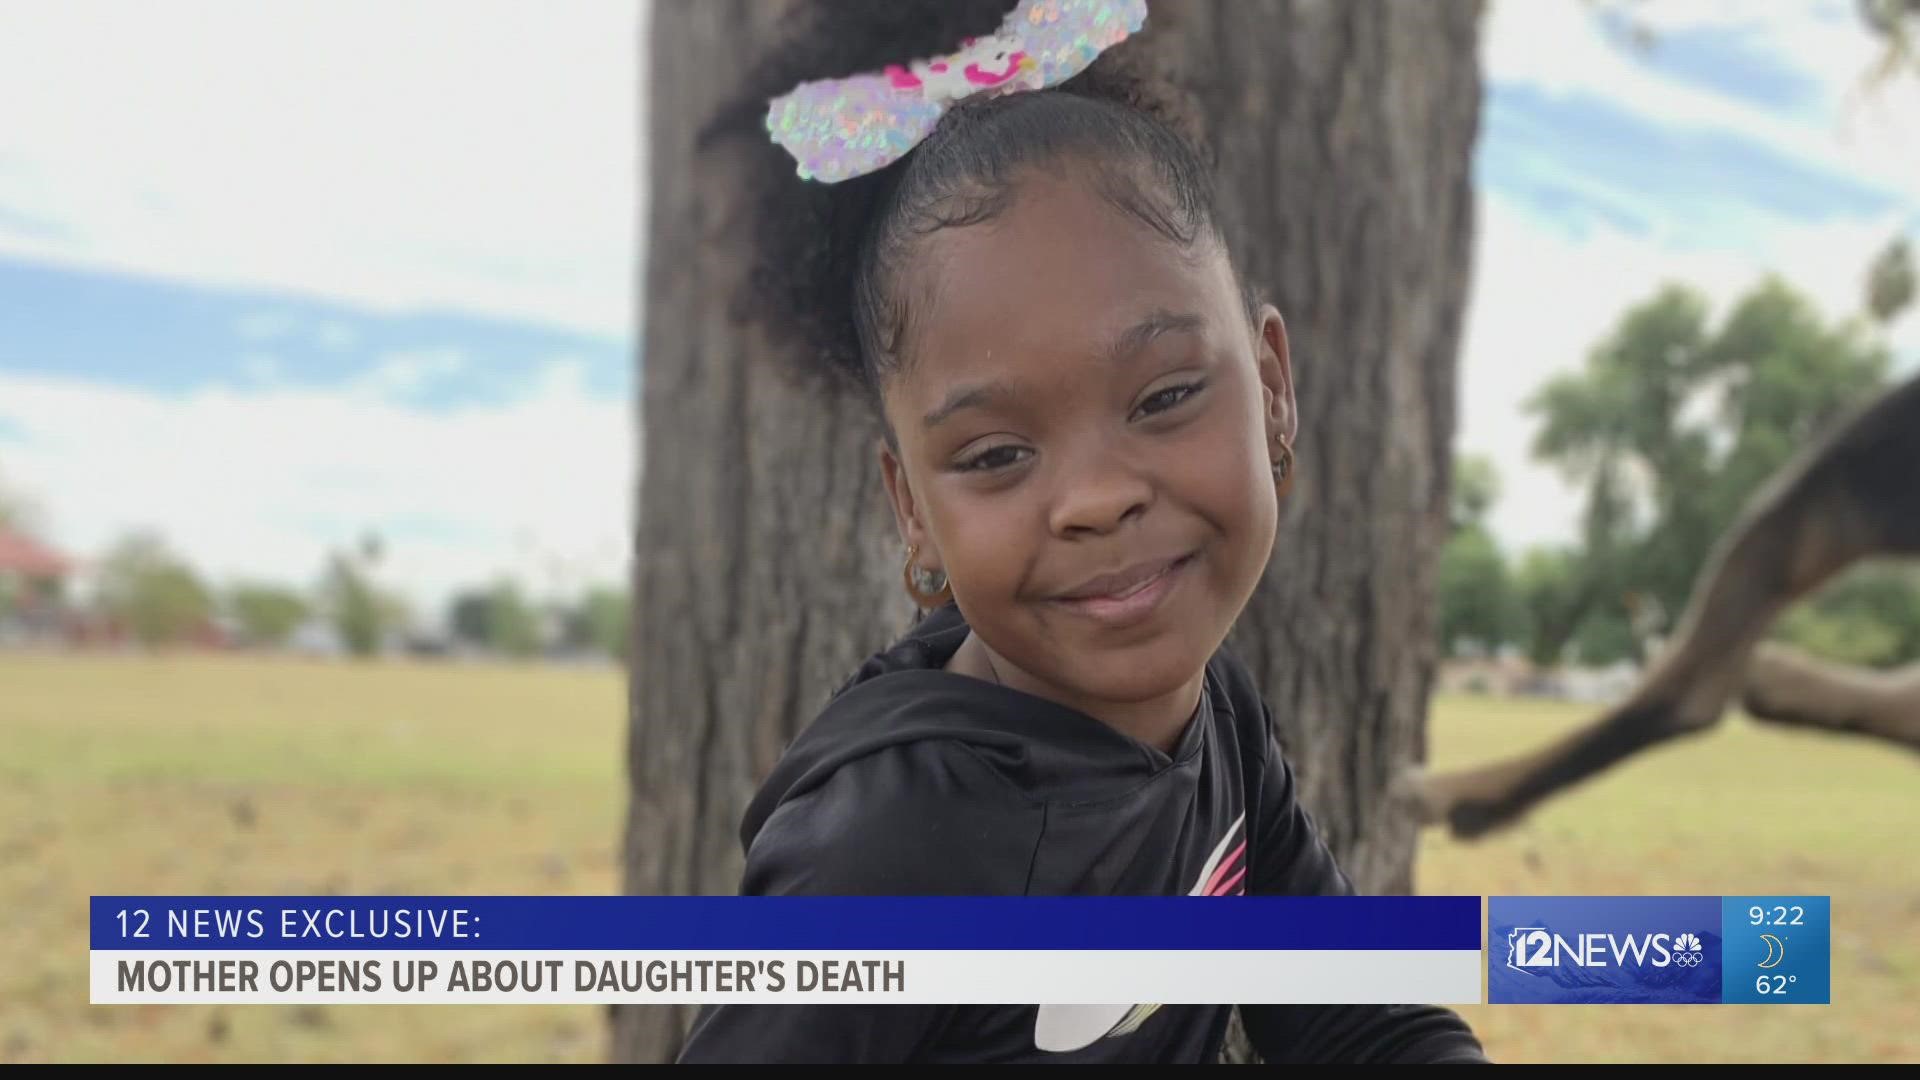 Police say the girl died early Thursday morning after she was struck by multiple gunshots fired into her mother’s car by somebody in another vehicle.